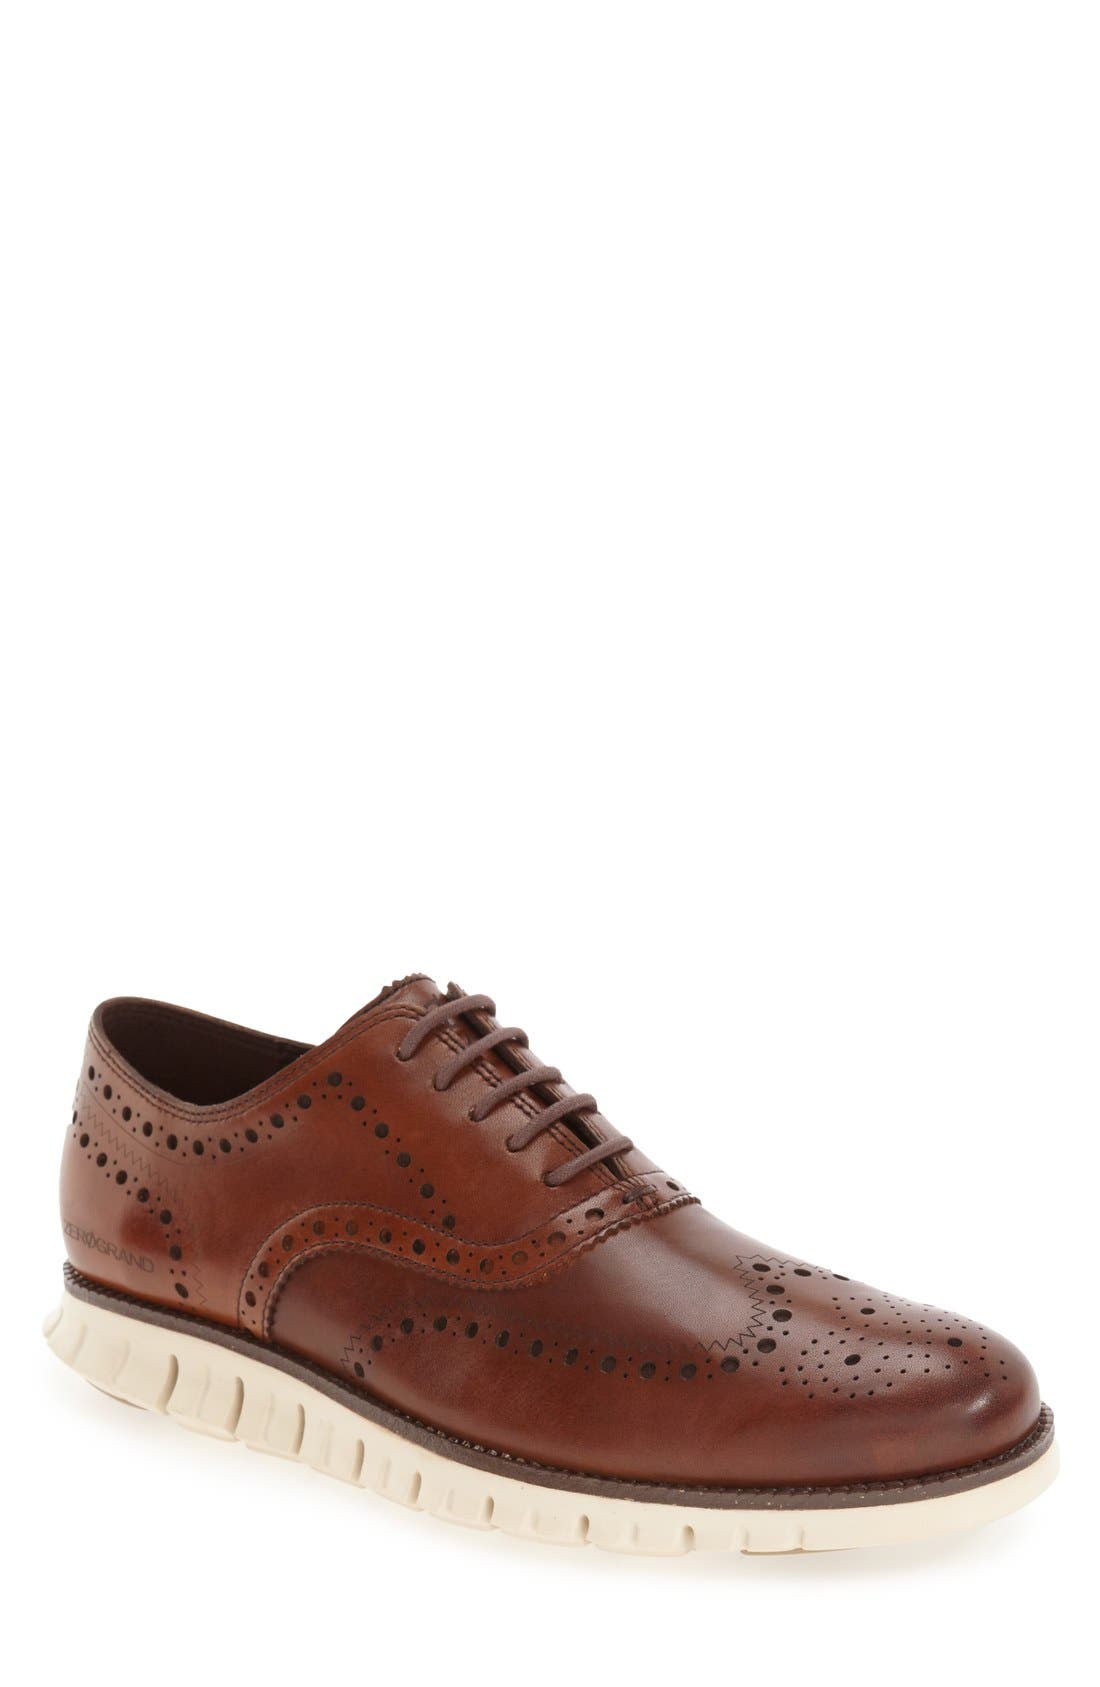 nordstrom mens shoes cole haan